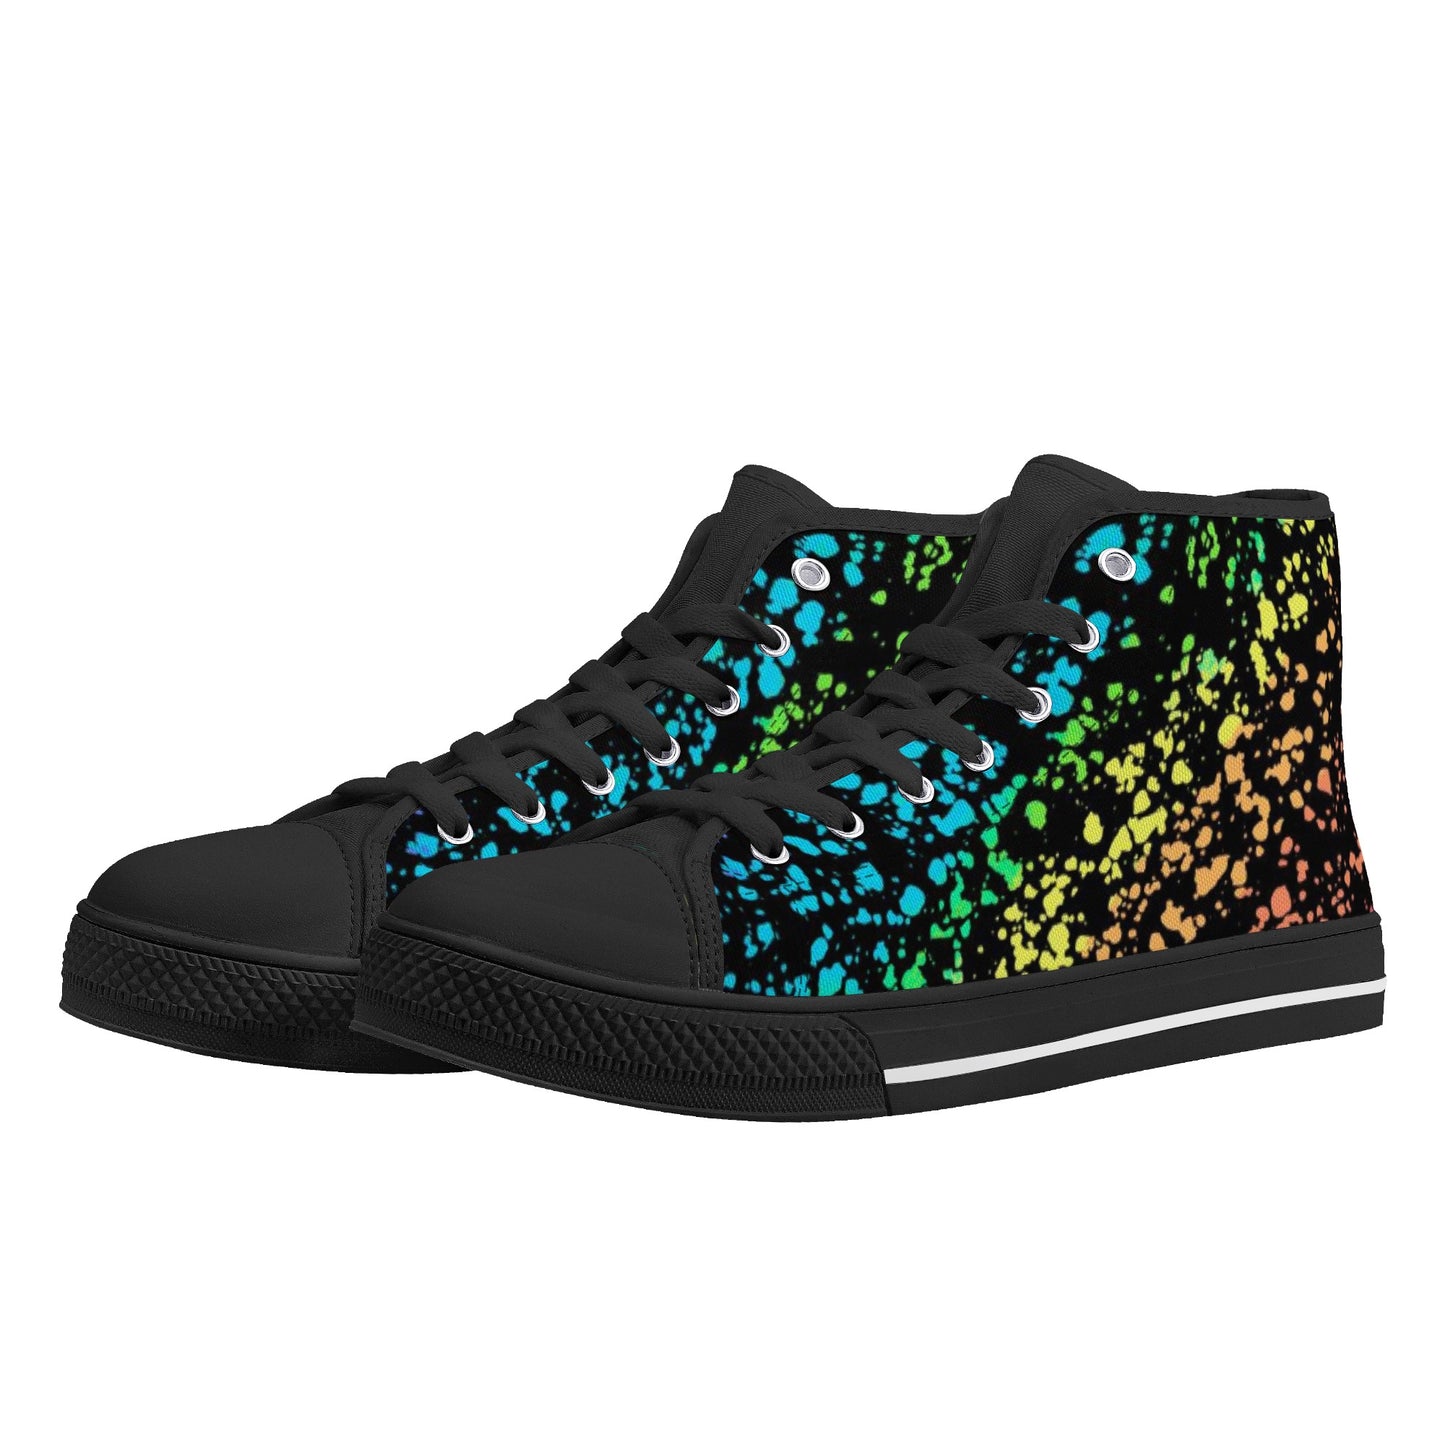 Rainbow Paint Spattered Men High Top Shoes, Lace Up Sneakers Black White Footwear Rave Canvas Streetwear Designer Gift Idea Starcove Fashion